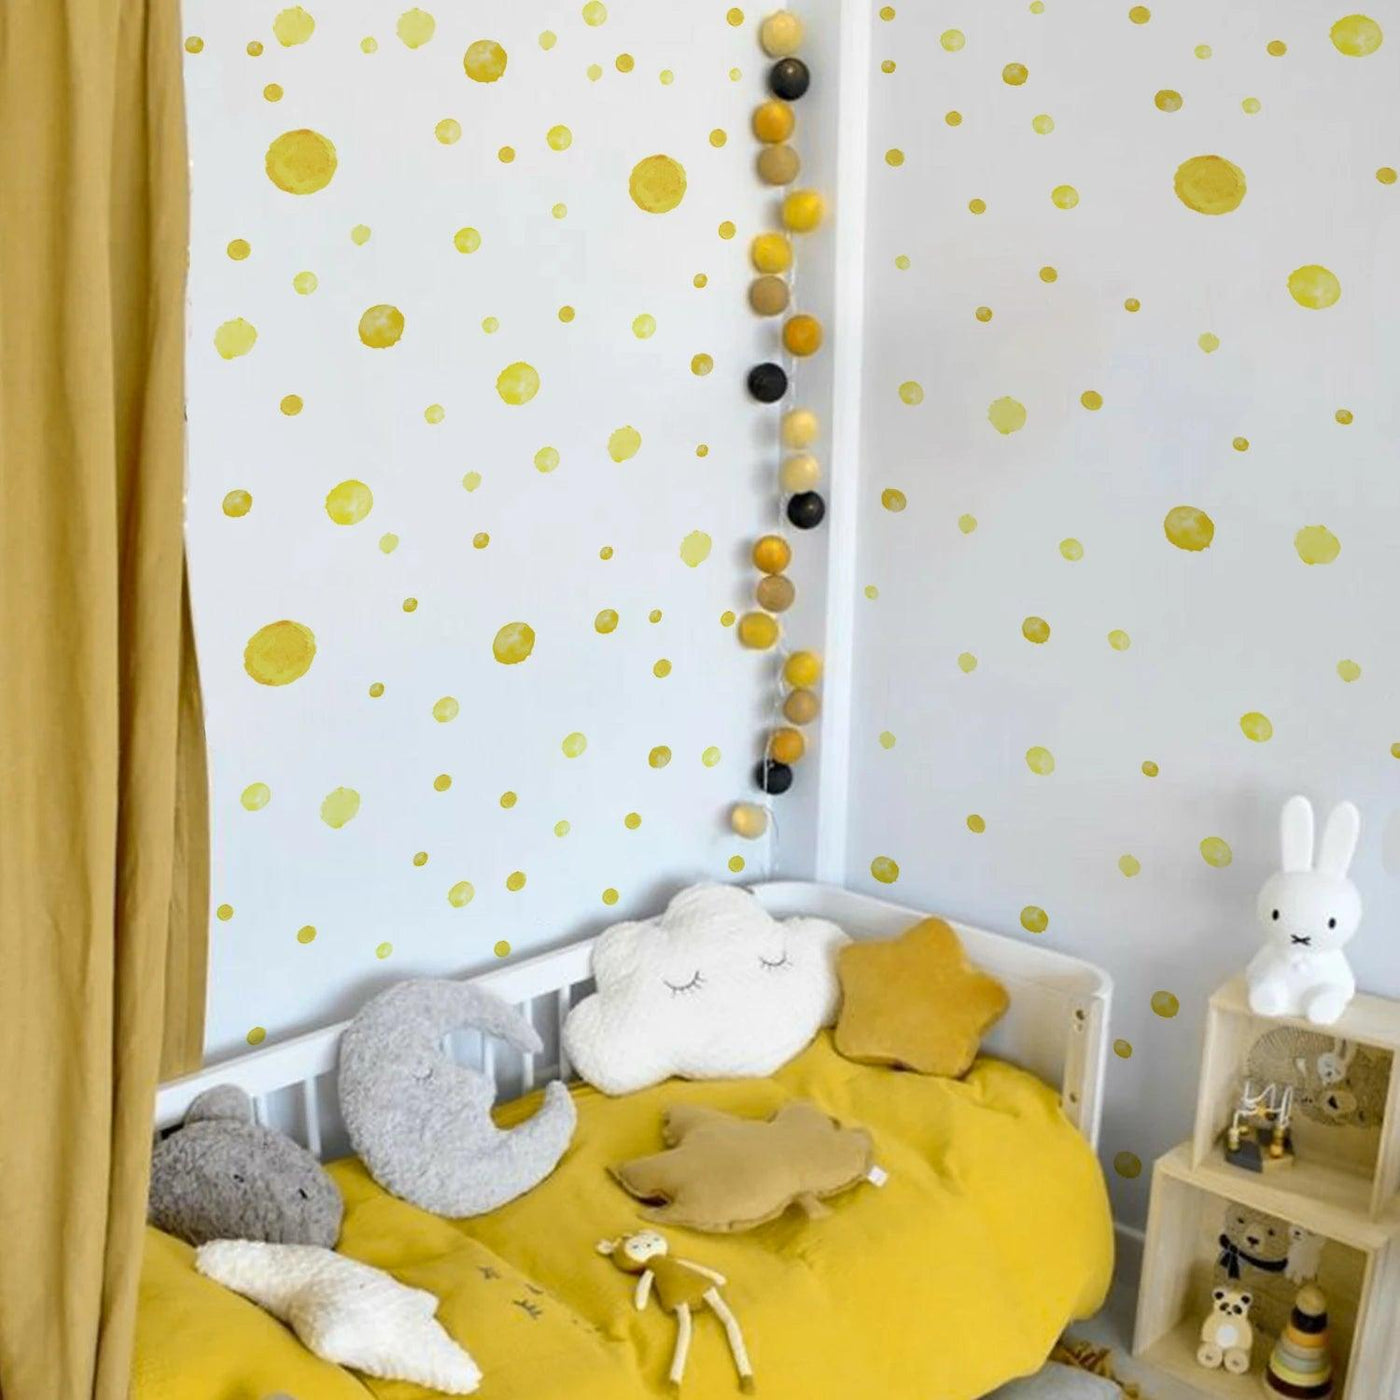 Funlife® 140 PCS Watercolor Lemon Yellow Polka Dots Decals for Nursery Kids Bedroom Classroom Decor Multicolor Wall Stickers - Parker and Olive